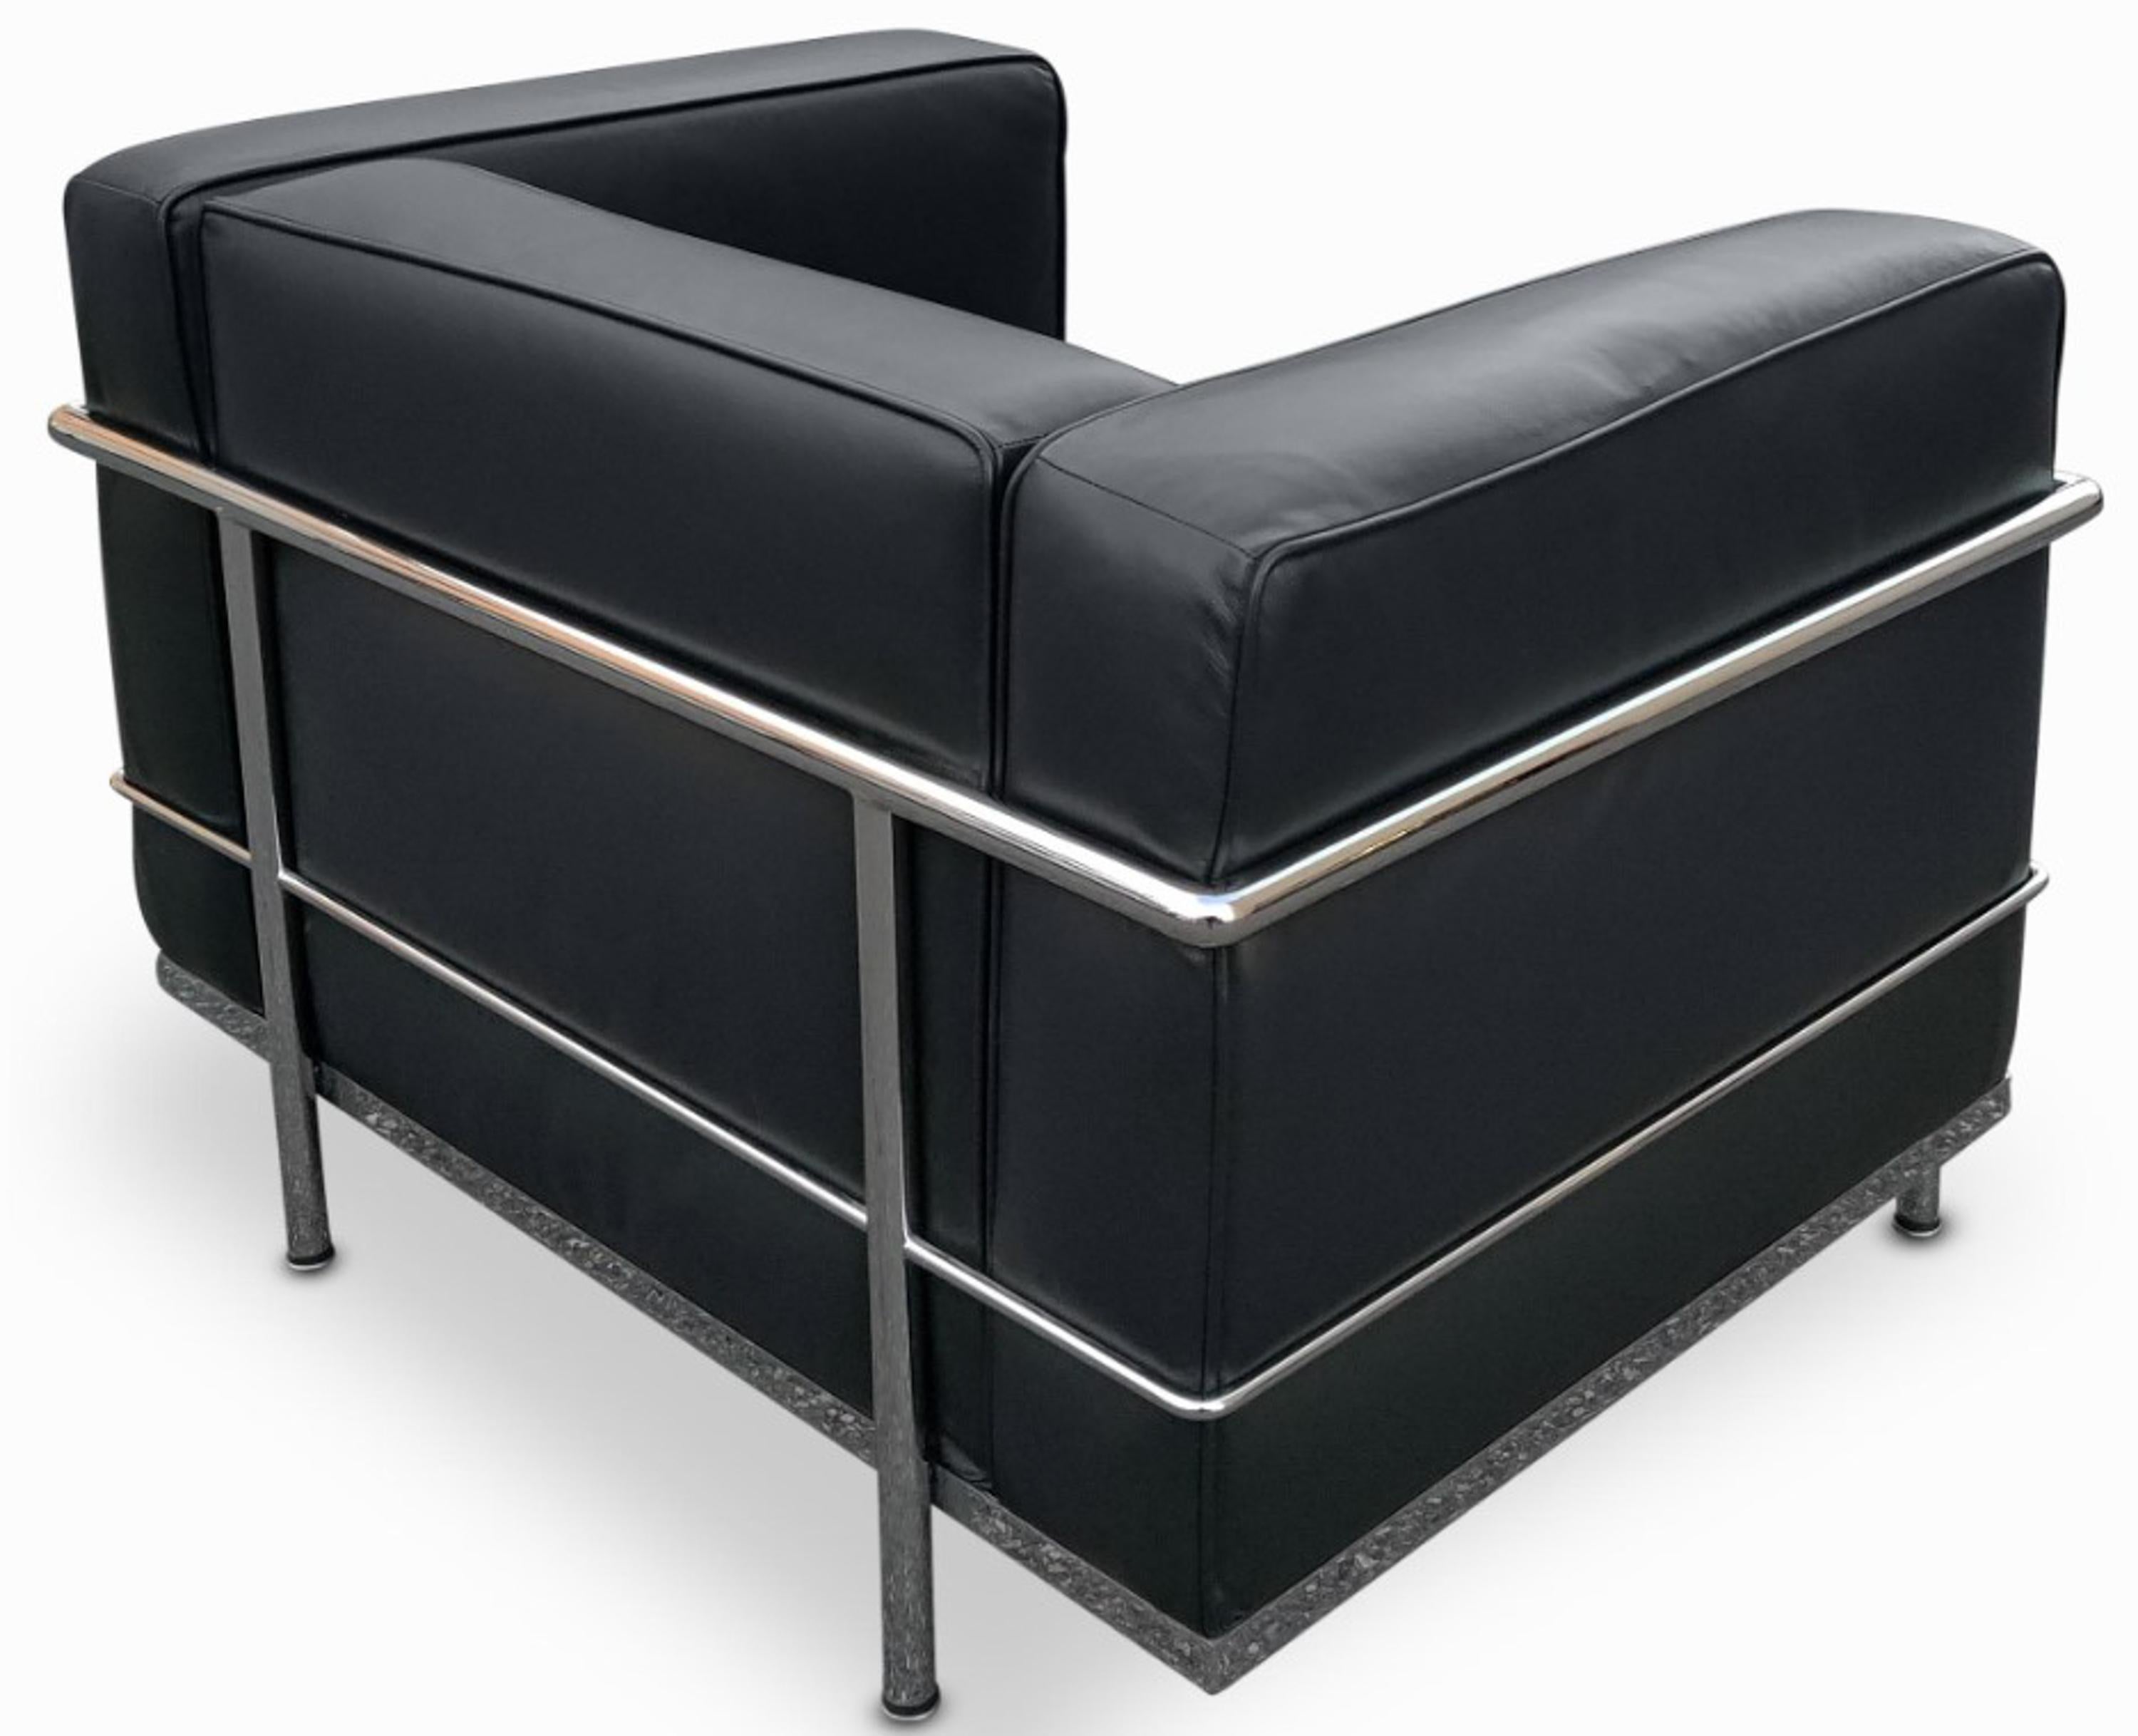 Pair of Gordon International Black Leather & Chromed Steel Club or Lounge Chairs For Sale 4